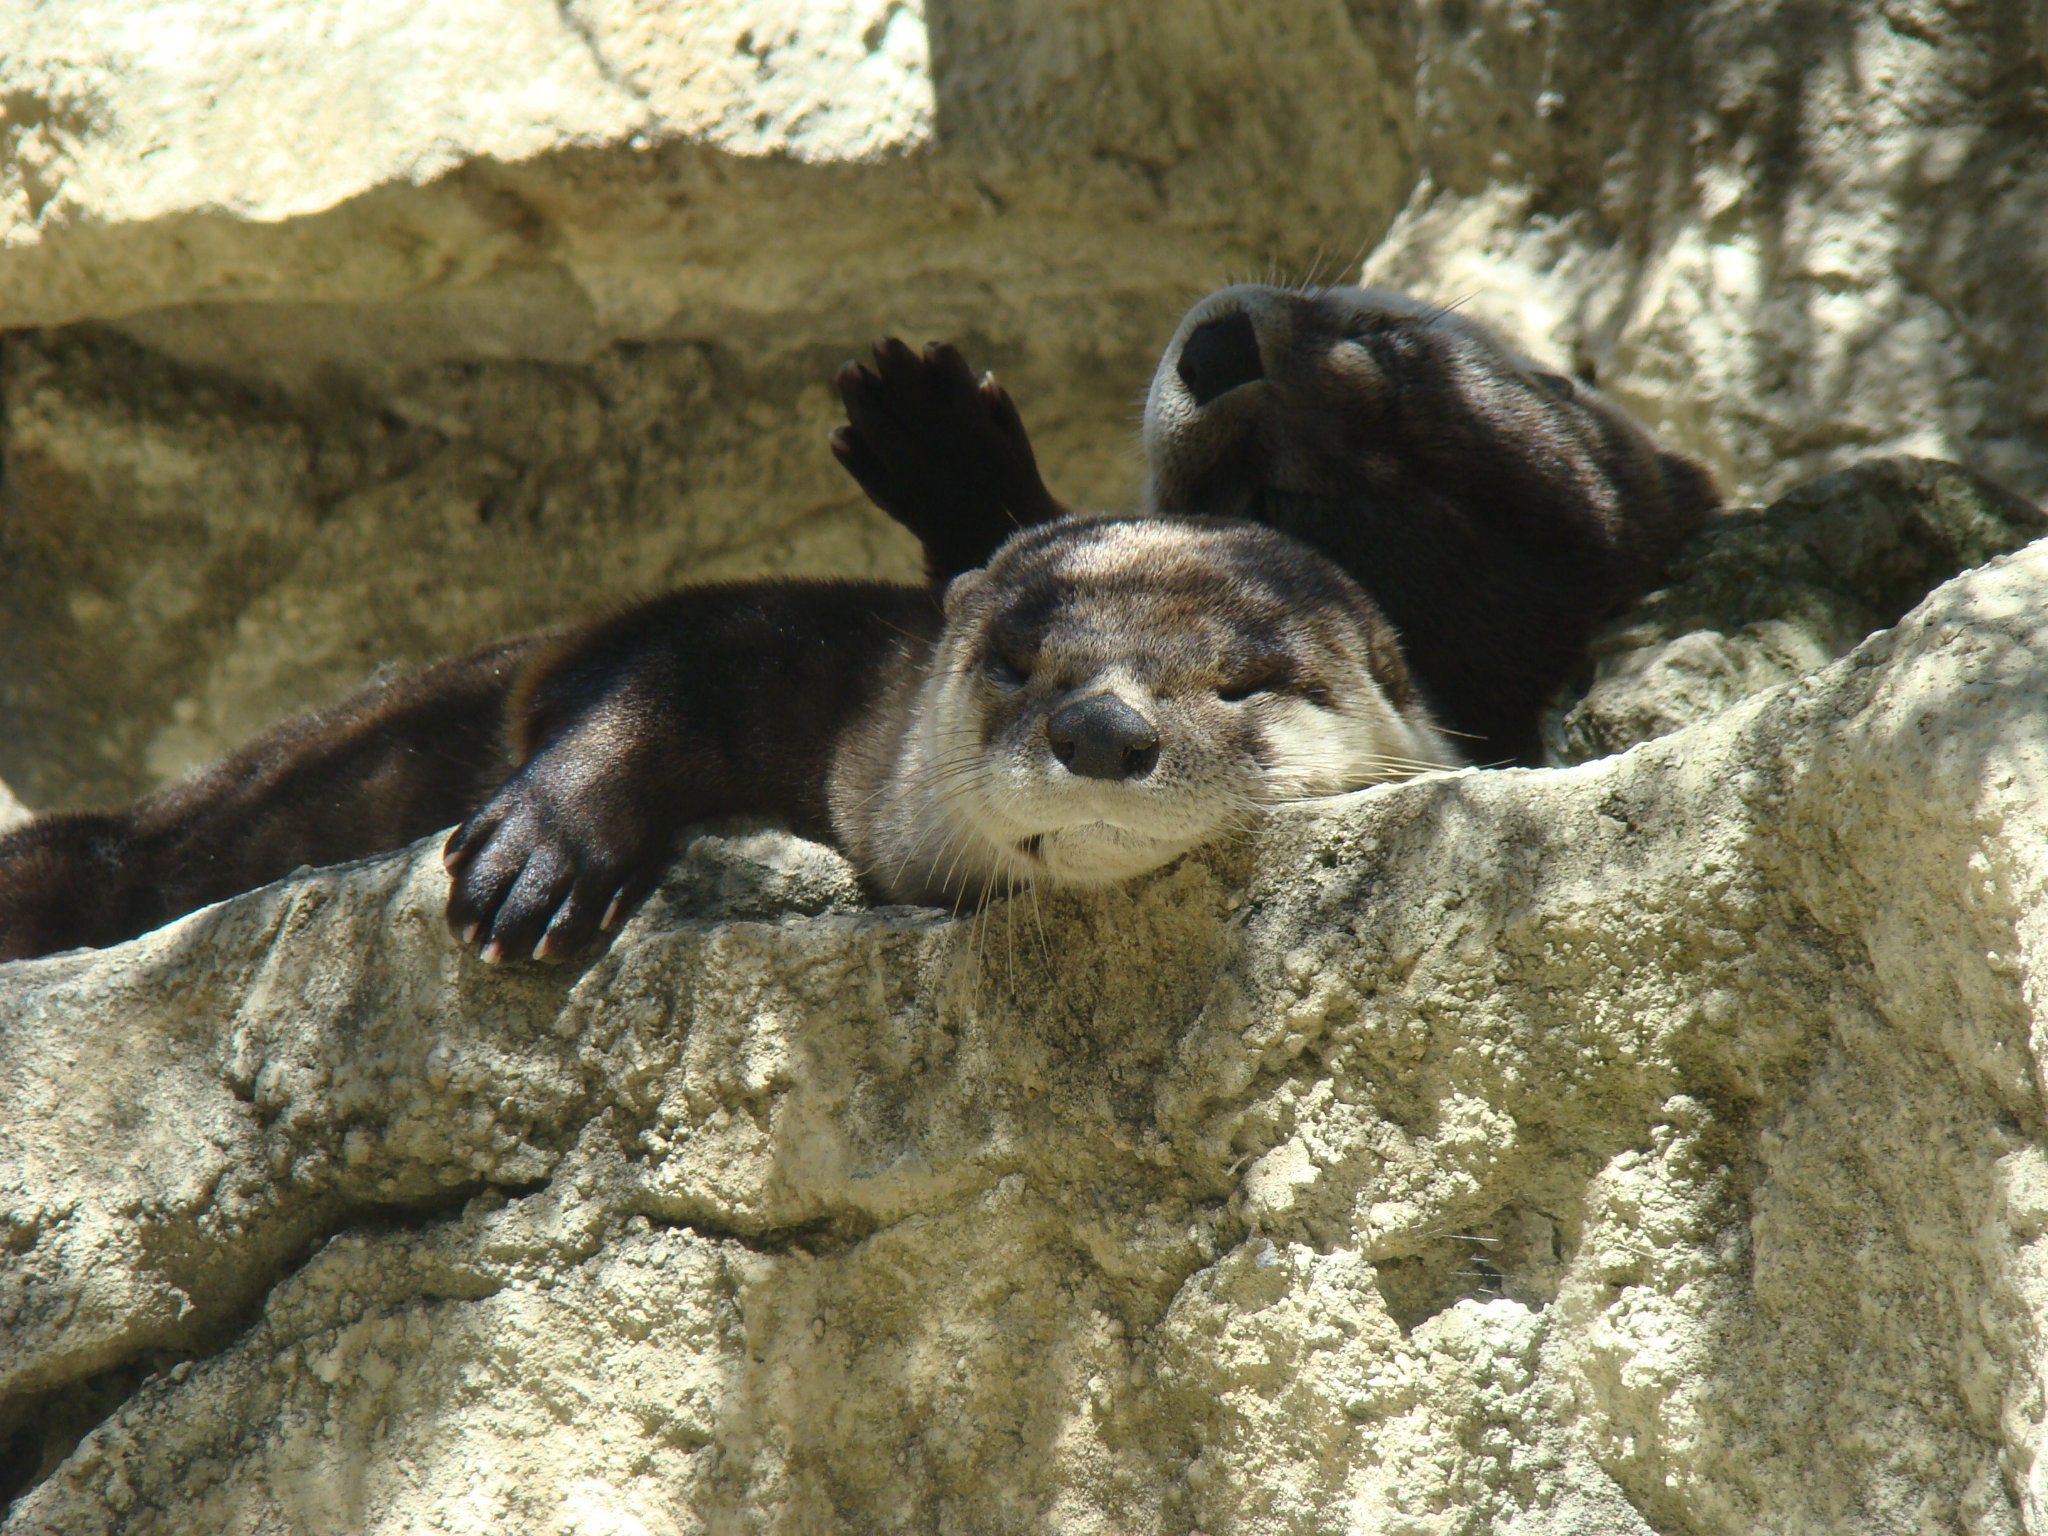 Beloved otters die after fourteen years impacting lives